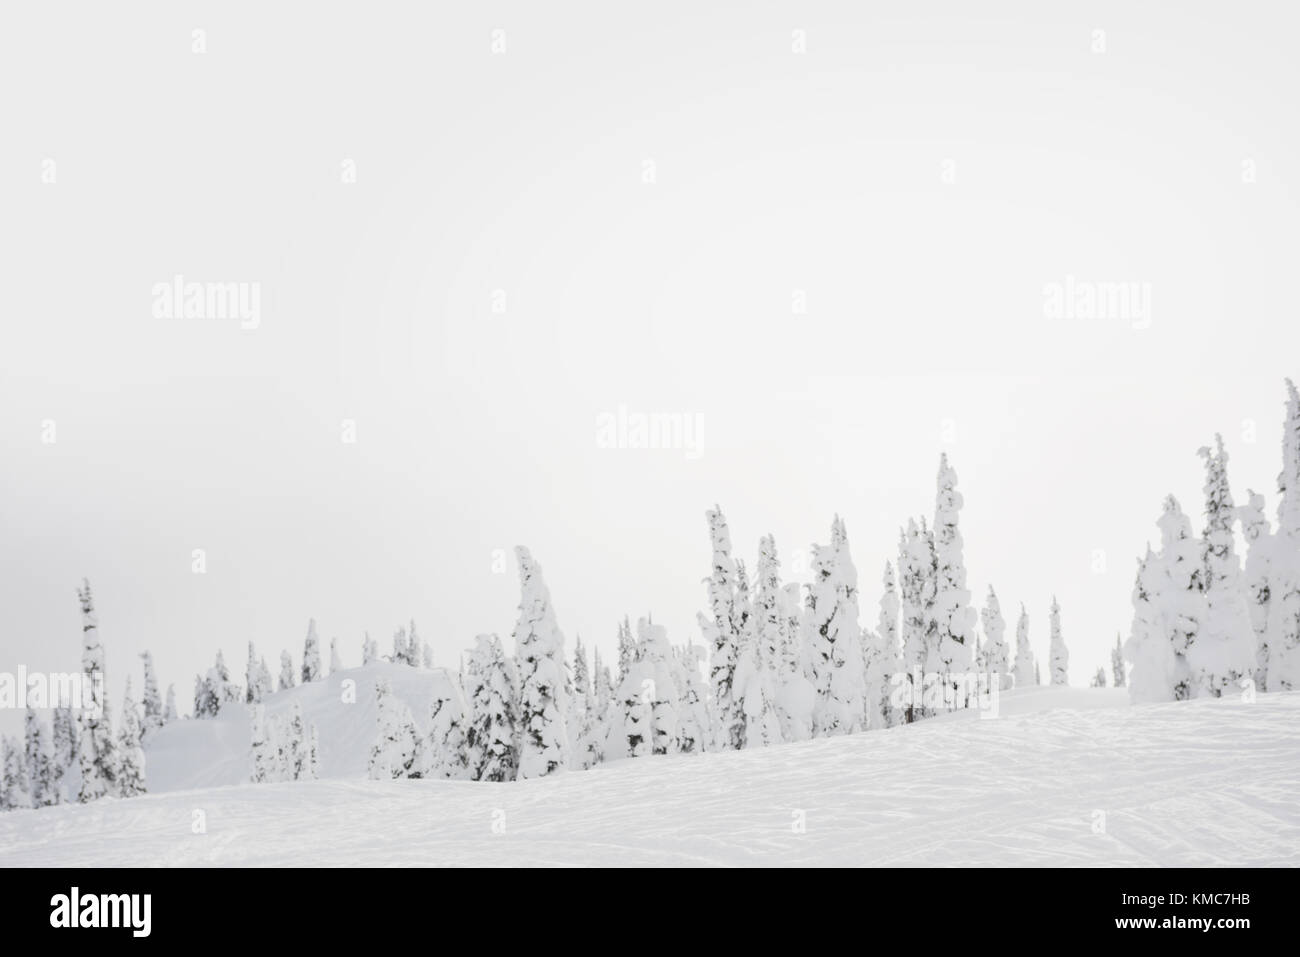 Beautiful winter landscape with snow covered trees Stock Photo